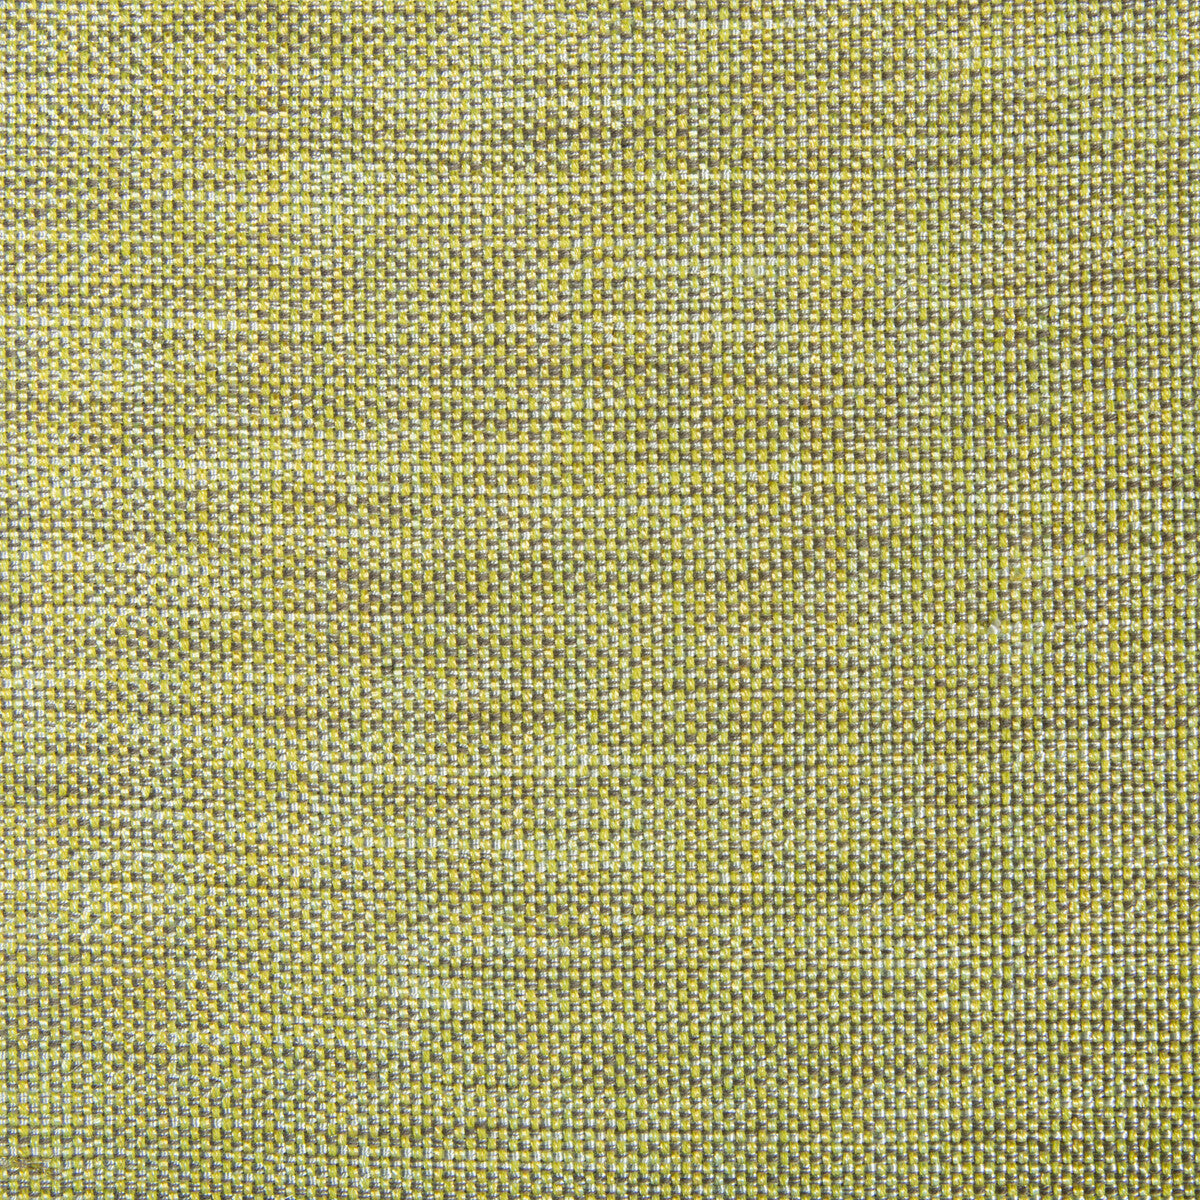 Kravet Contract fabric in 4458-1411 color - pattern 4458.1411.0 - by Kravet Contract